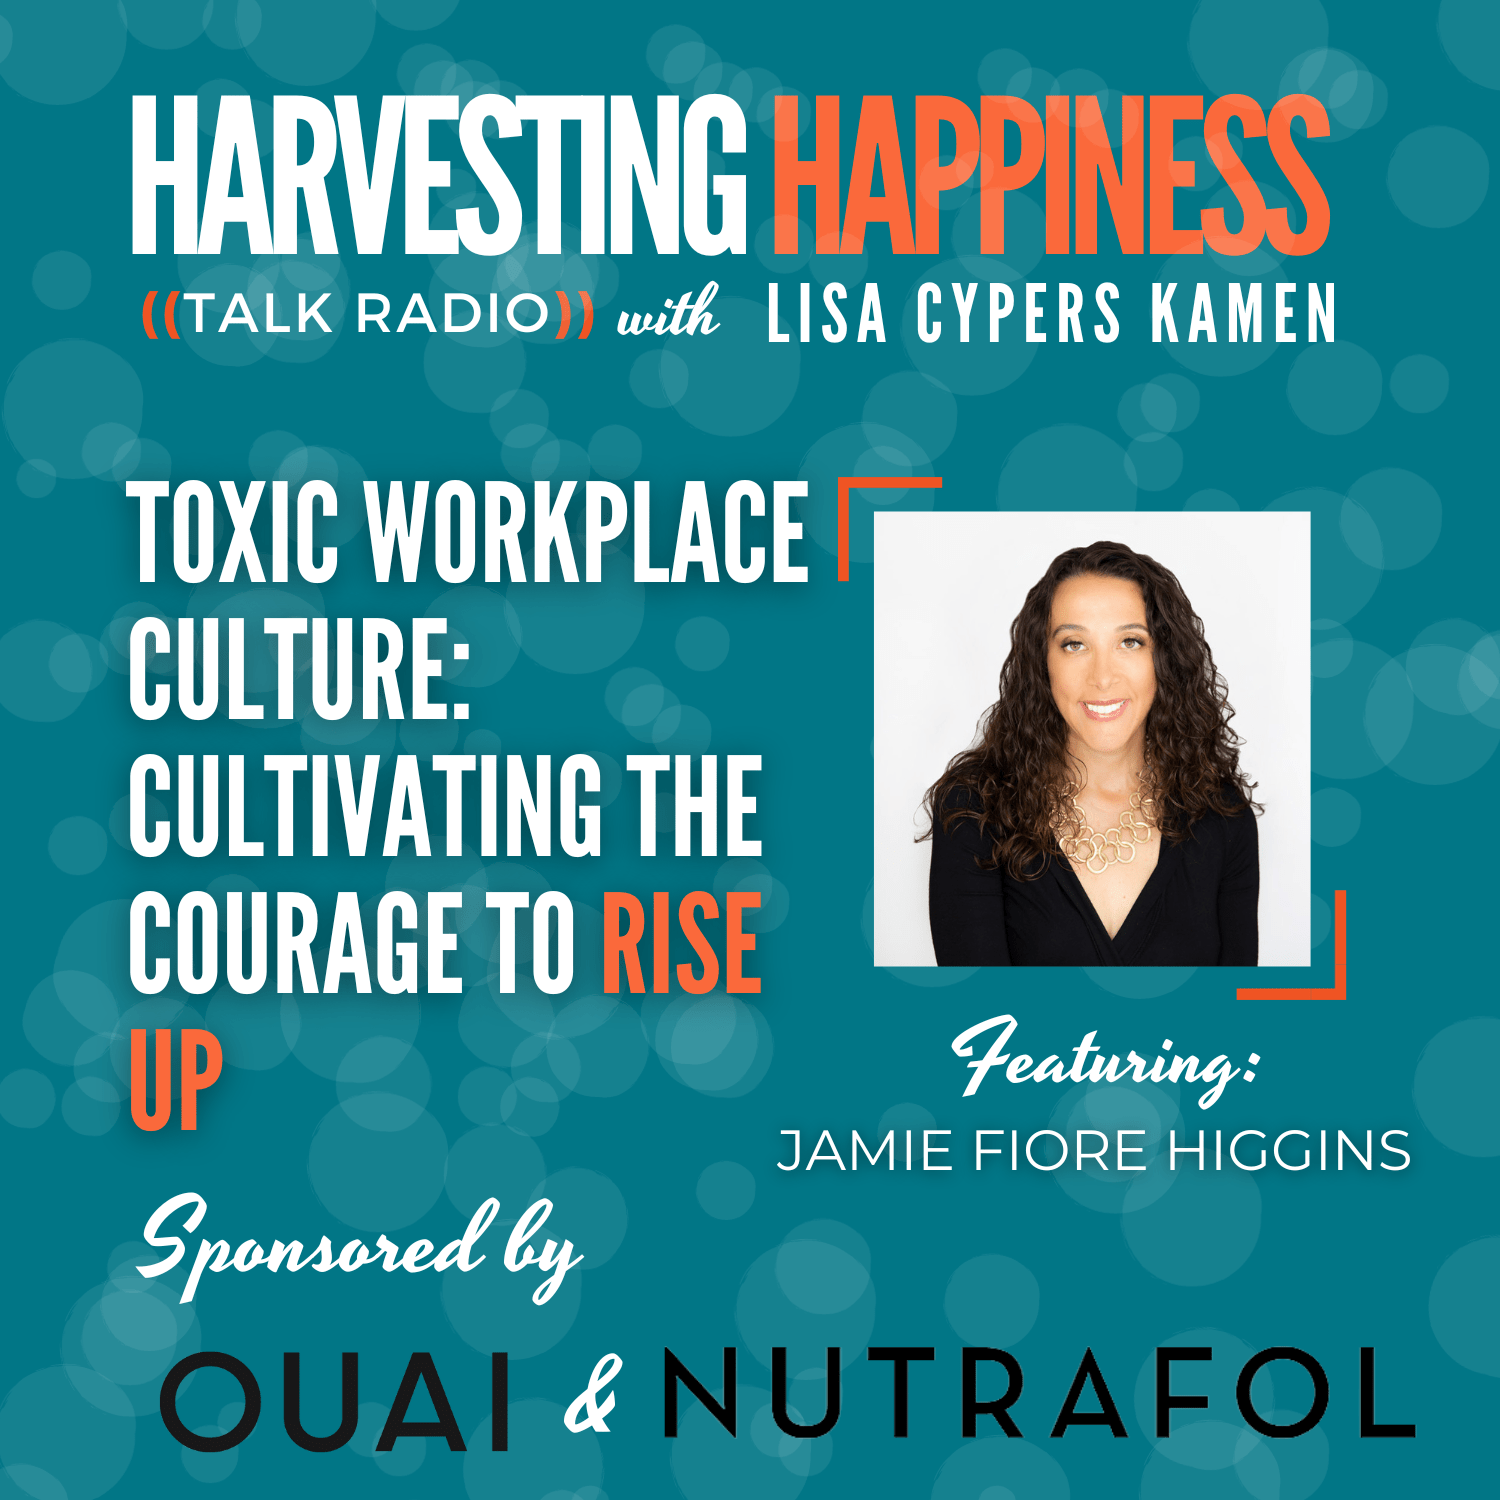 Toxic Workplace Culture: Cultivating The Courage to Rise Up with Jamie Fiore Higgins